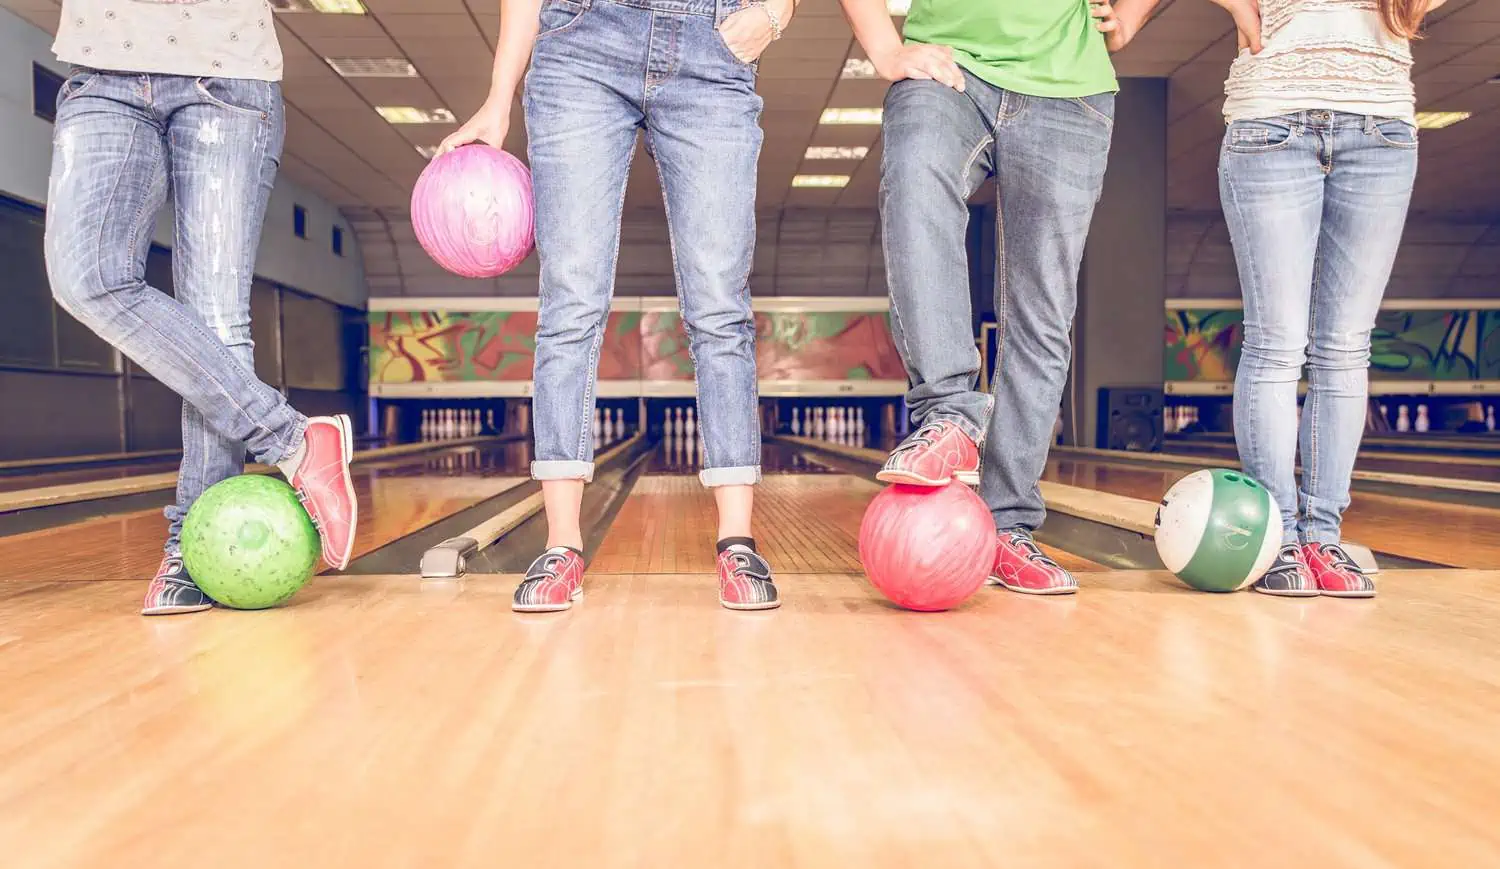 Four people with bowling balls